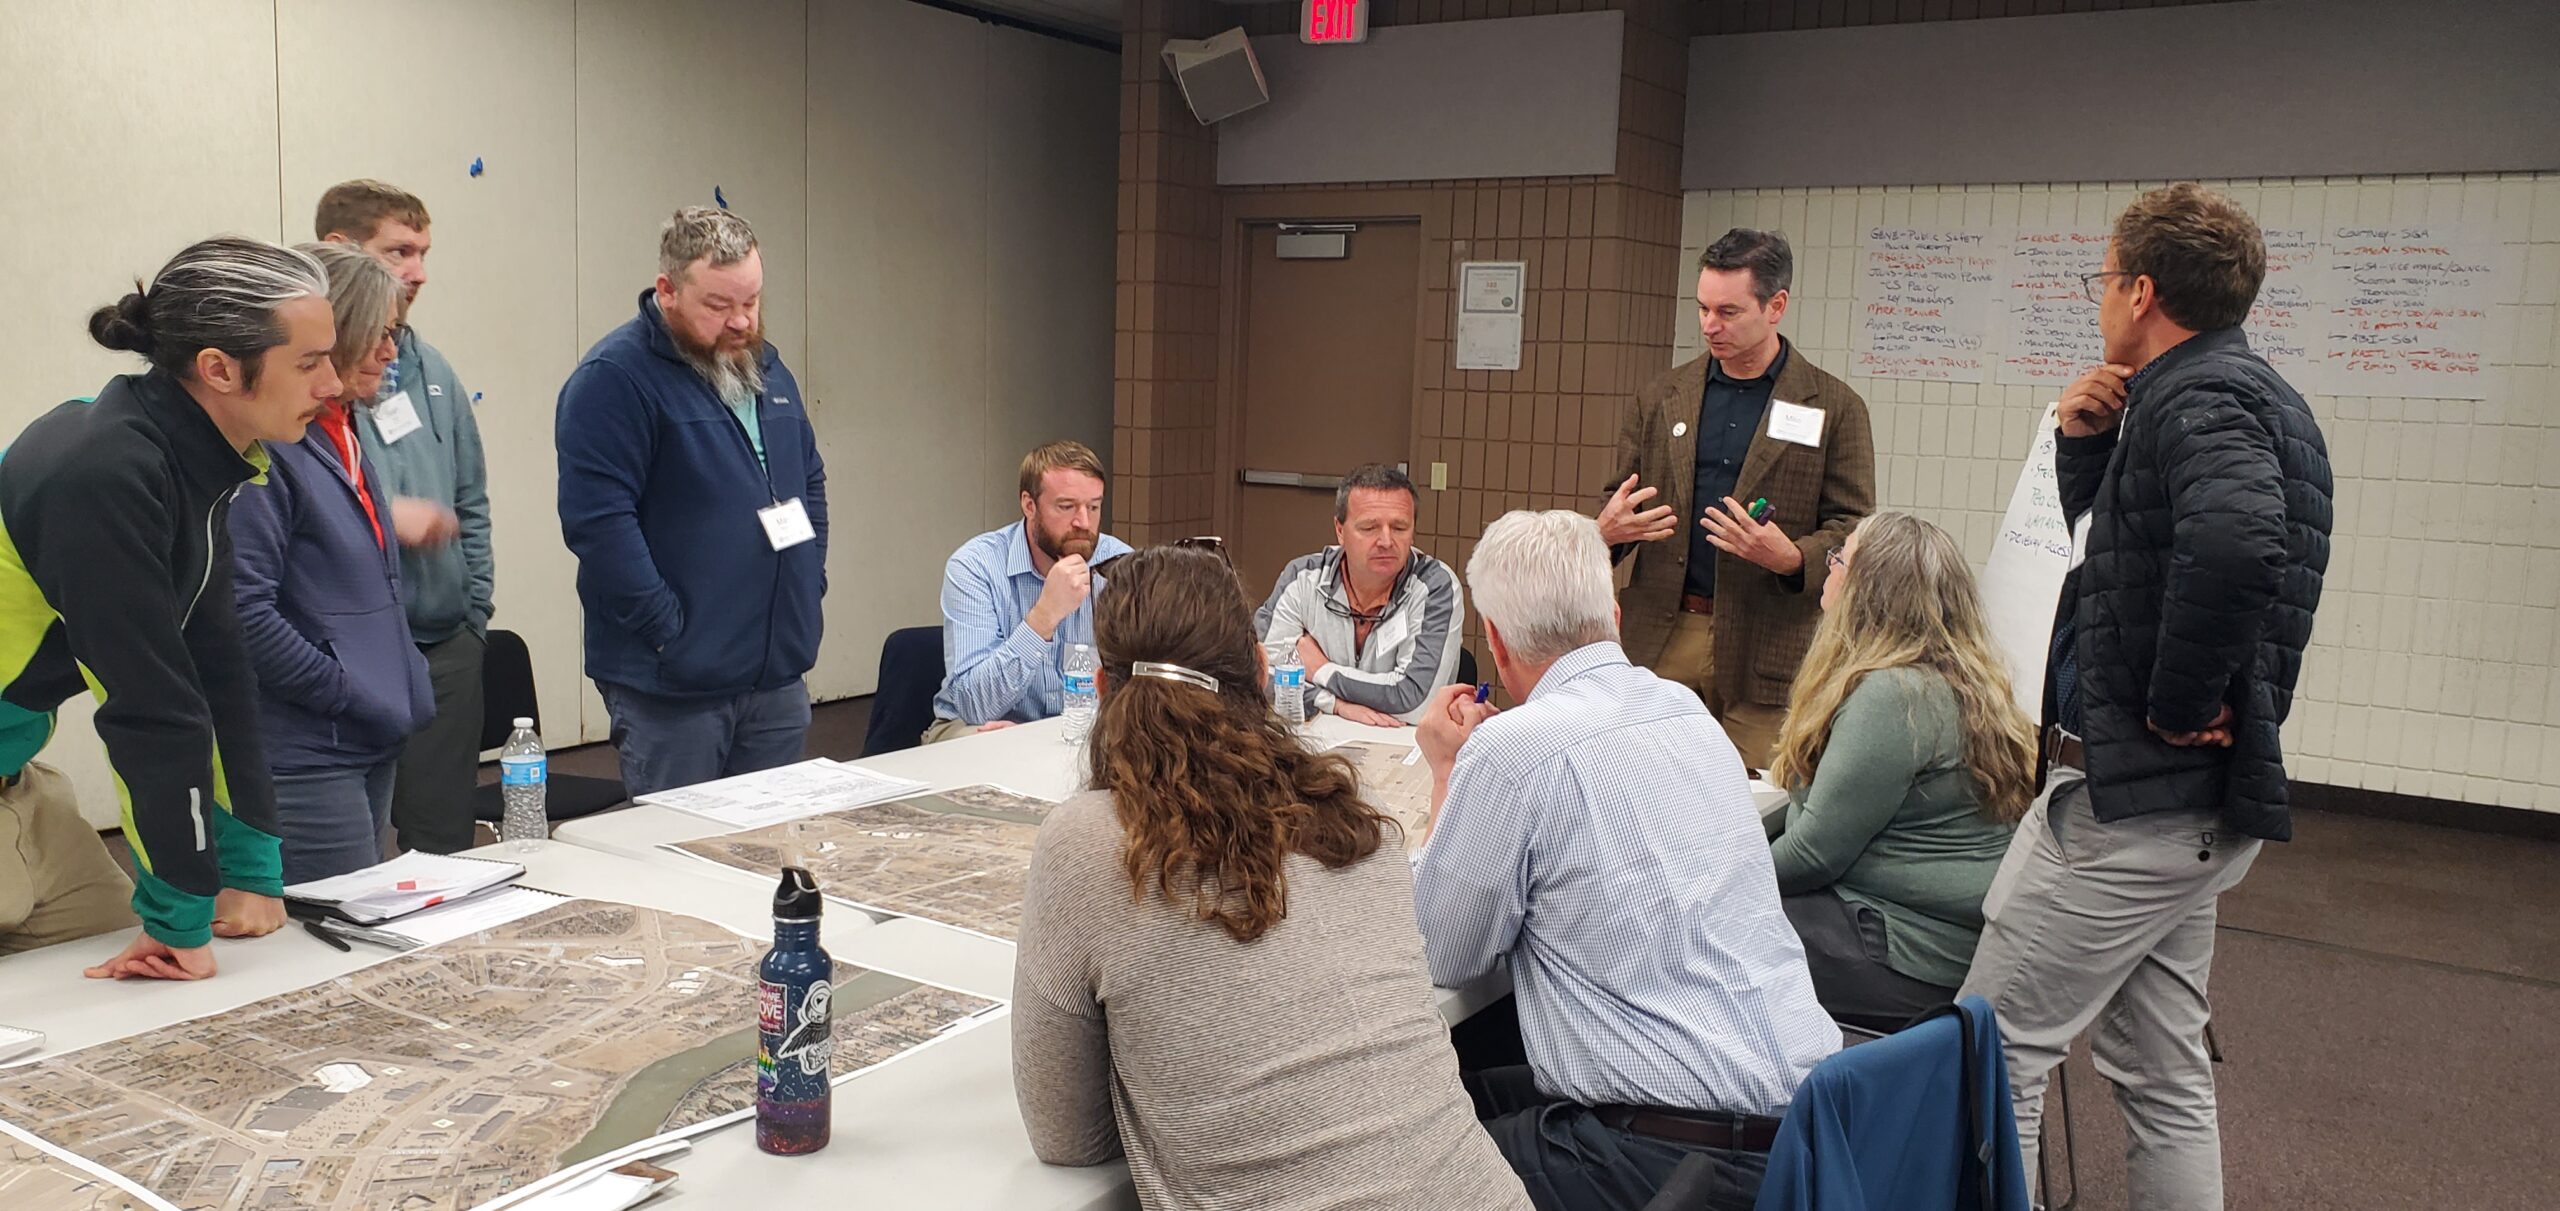 Soldotna, AK: Complete Streets Leadership Academy case study